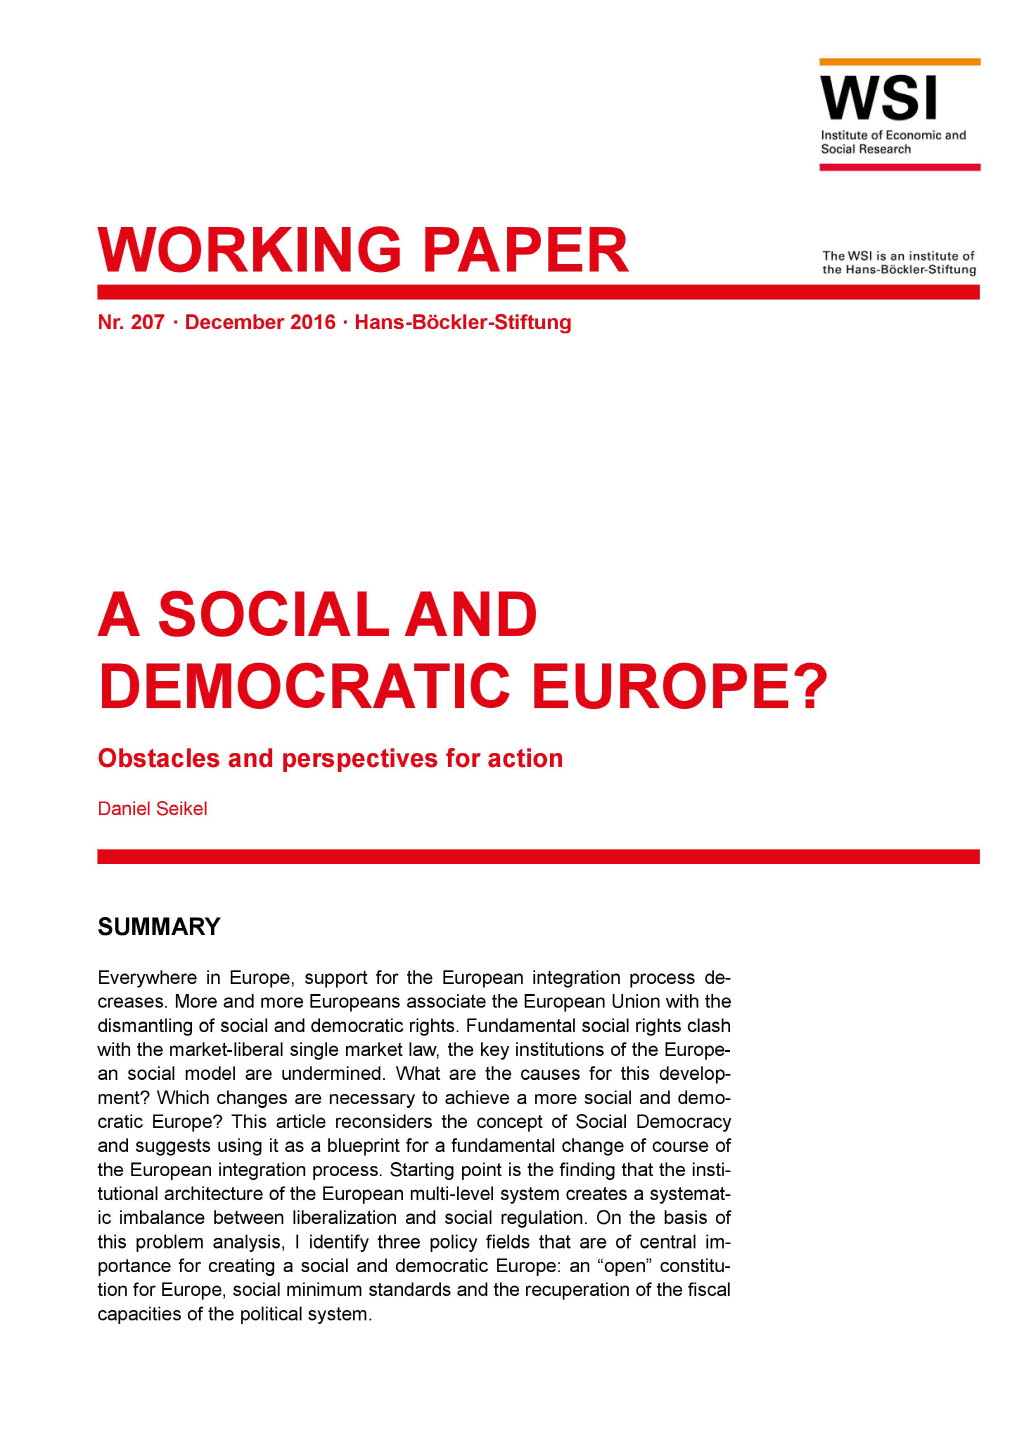 A social and democratic Europe?